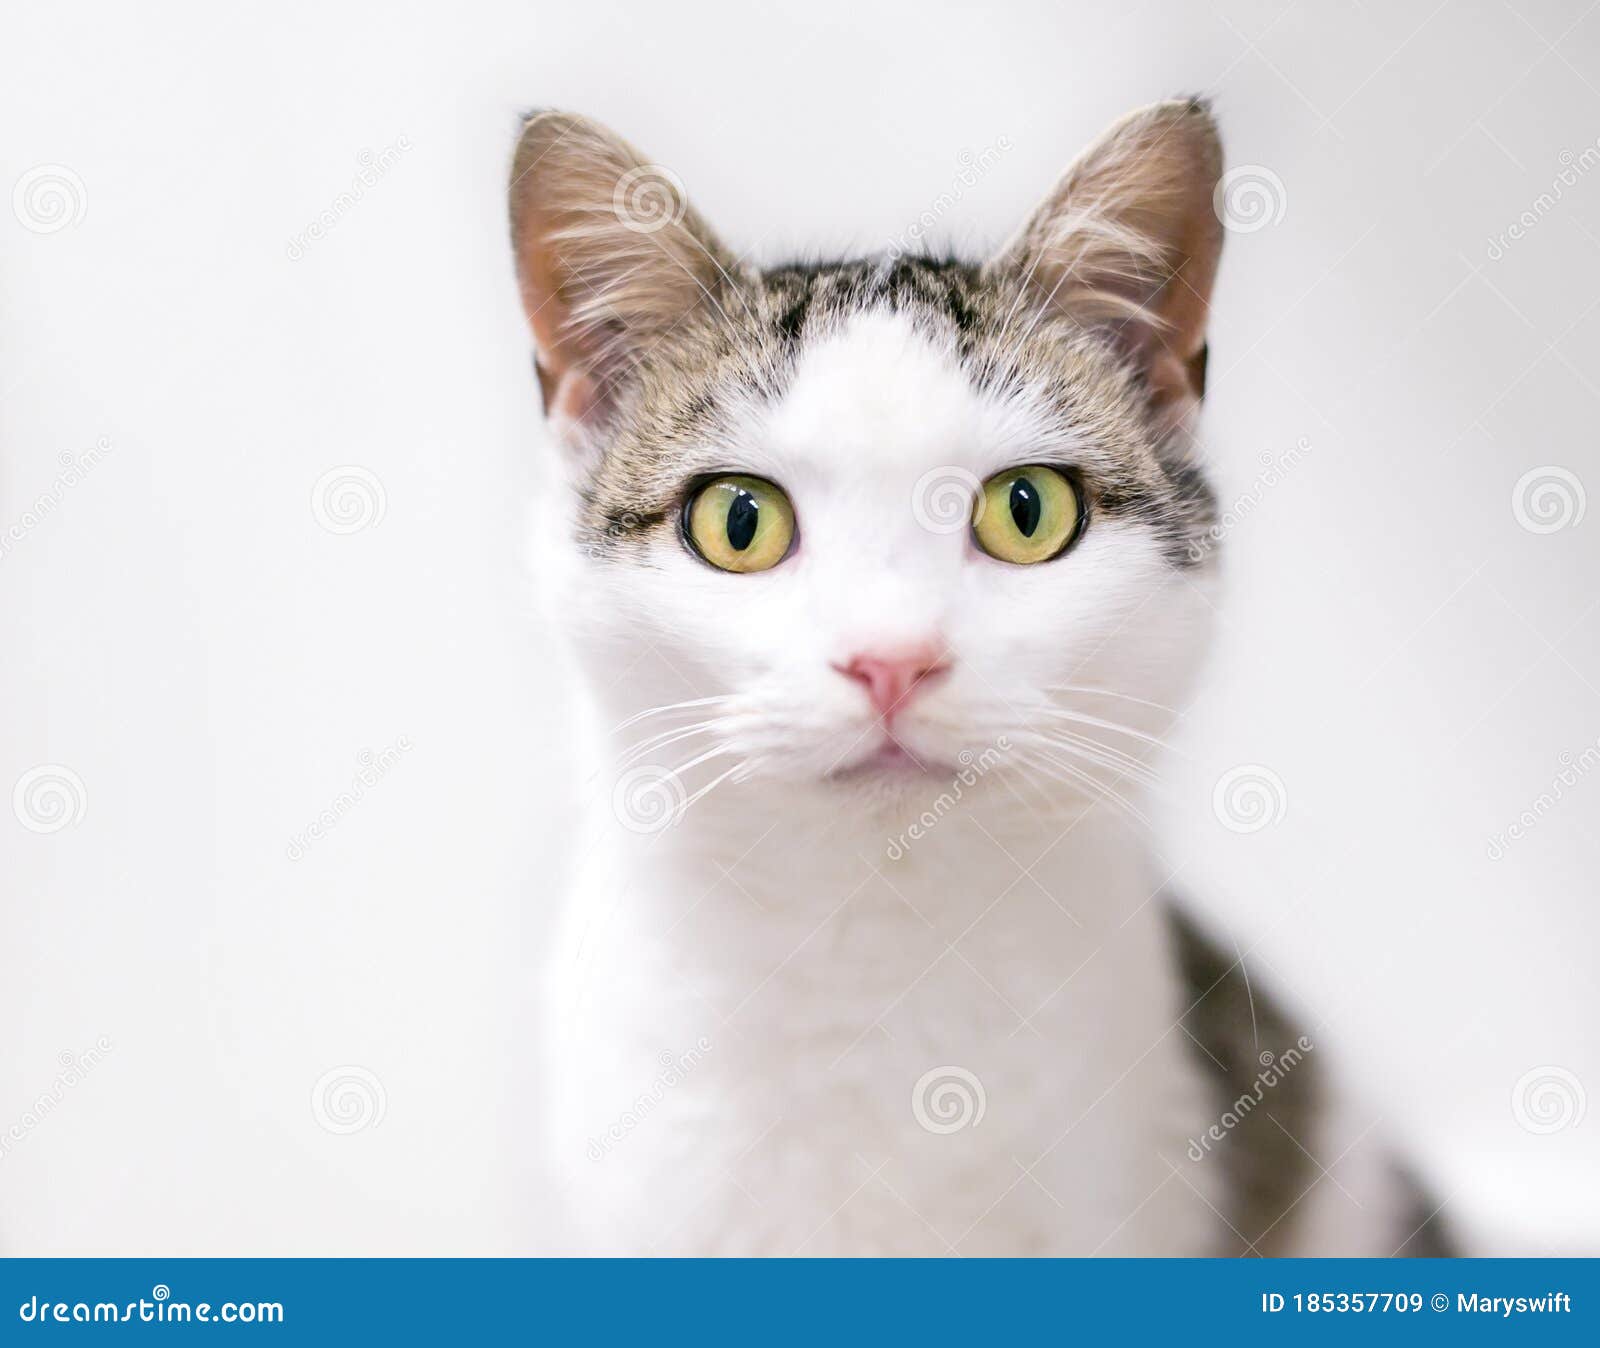 A Young Domestic Shorthair Cat with Tabby and White Markings Stock Image -  Image of kitty, housecat: 185357709